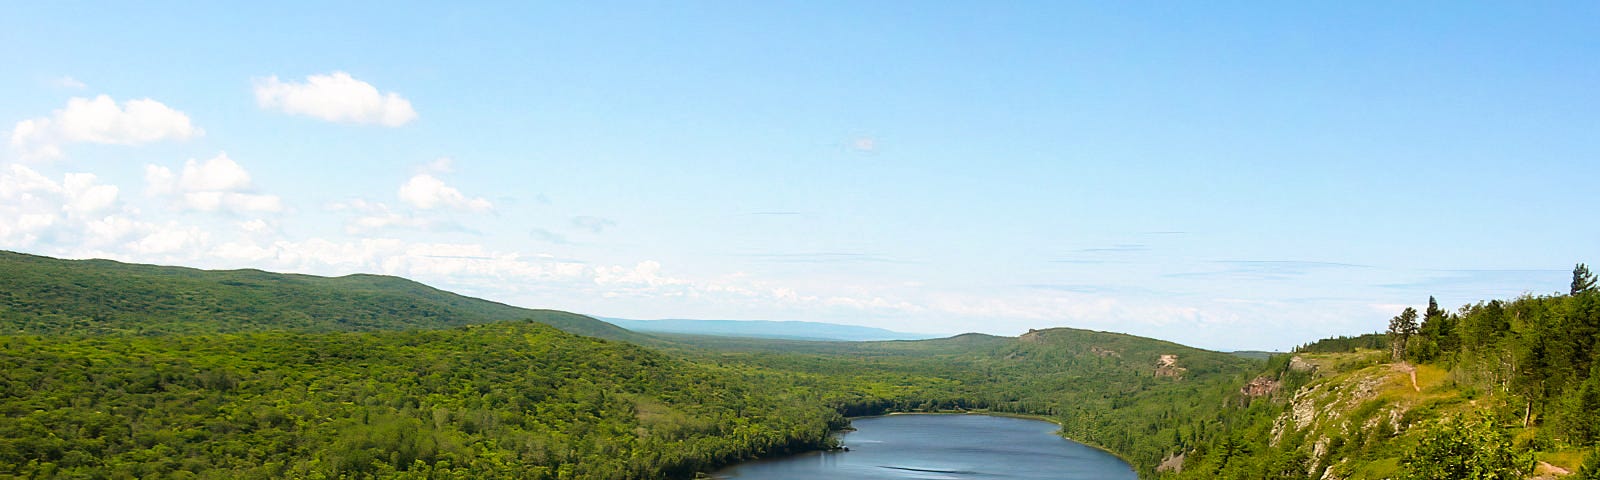 Lake of the Clouds as viewed from the Escarpment trail., Photo by Troy A. Heck, I, the copyright holder of this work, release this work into the public domain. This applies worldwide., File:FullLakeOfTheClouds.JPG — Wikimedia Commons